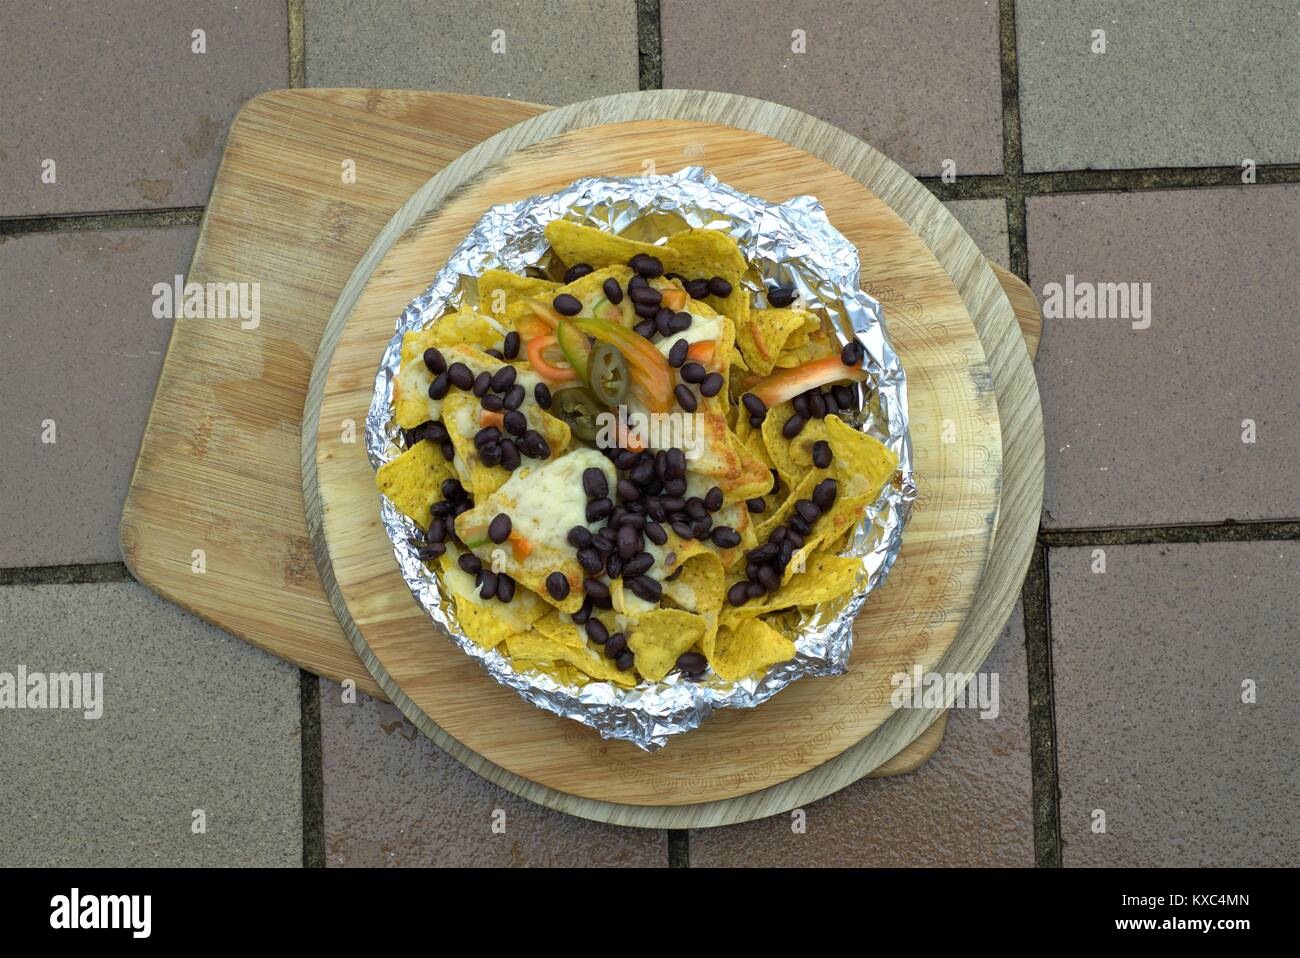 Mexican Nachos or Latin American - Close up of Black beans jalapeno pepper on corn tortilla chips with melted cheese on wooden platter. Stock Photo